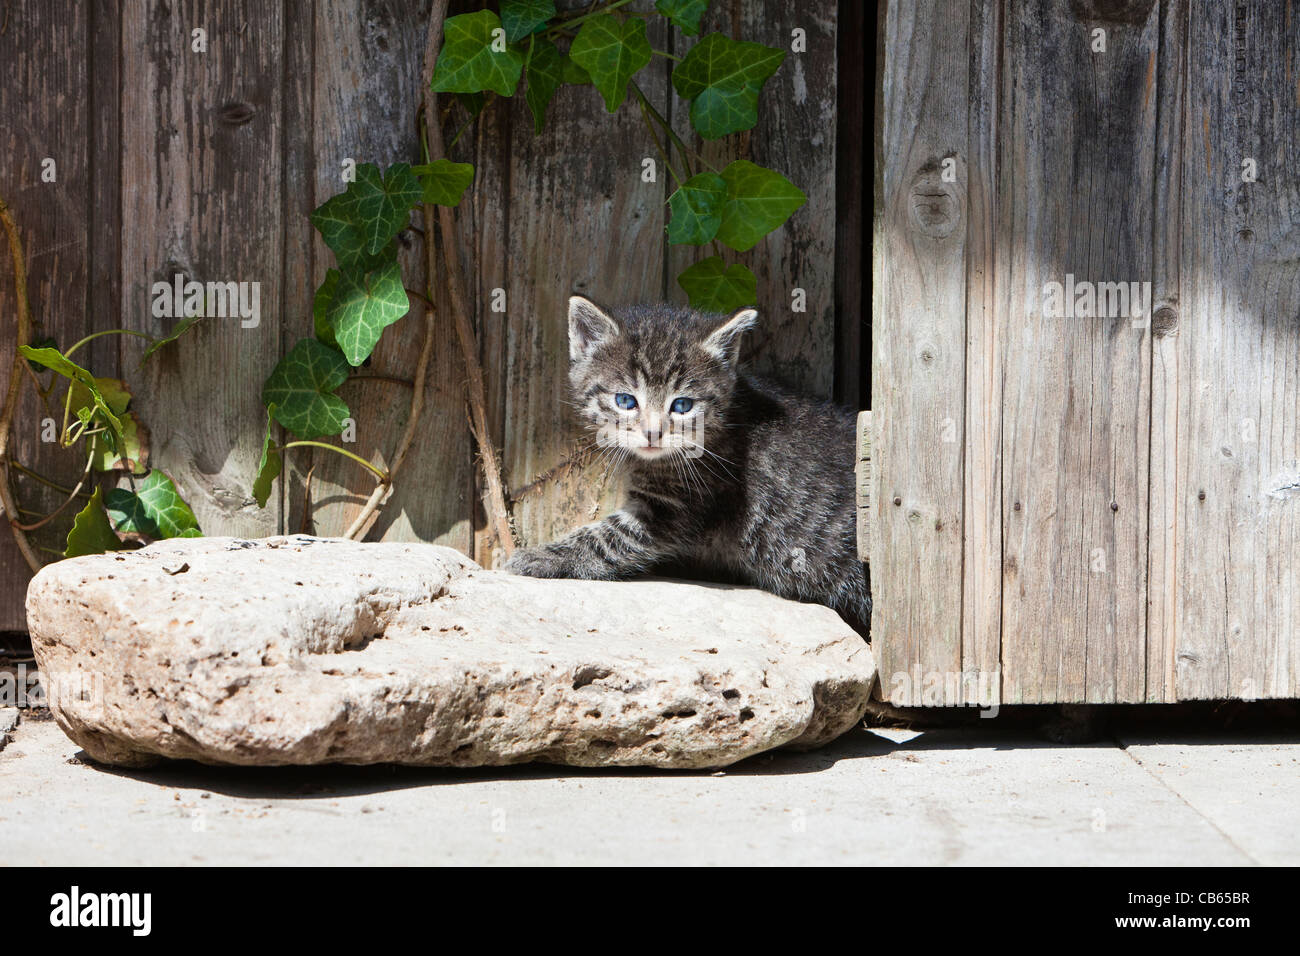 Kitten, looking out of garden shed door, Lower Saxony, Germany Stock Photo